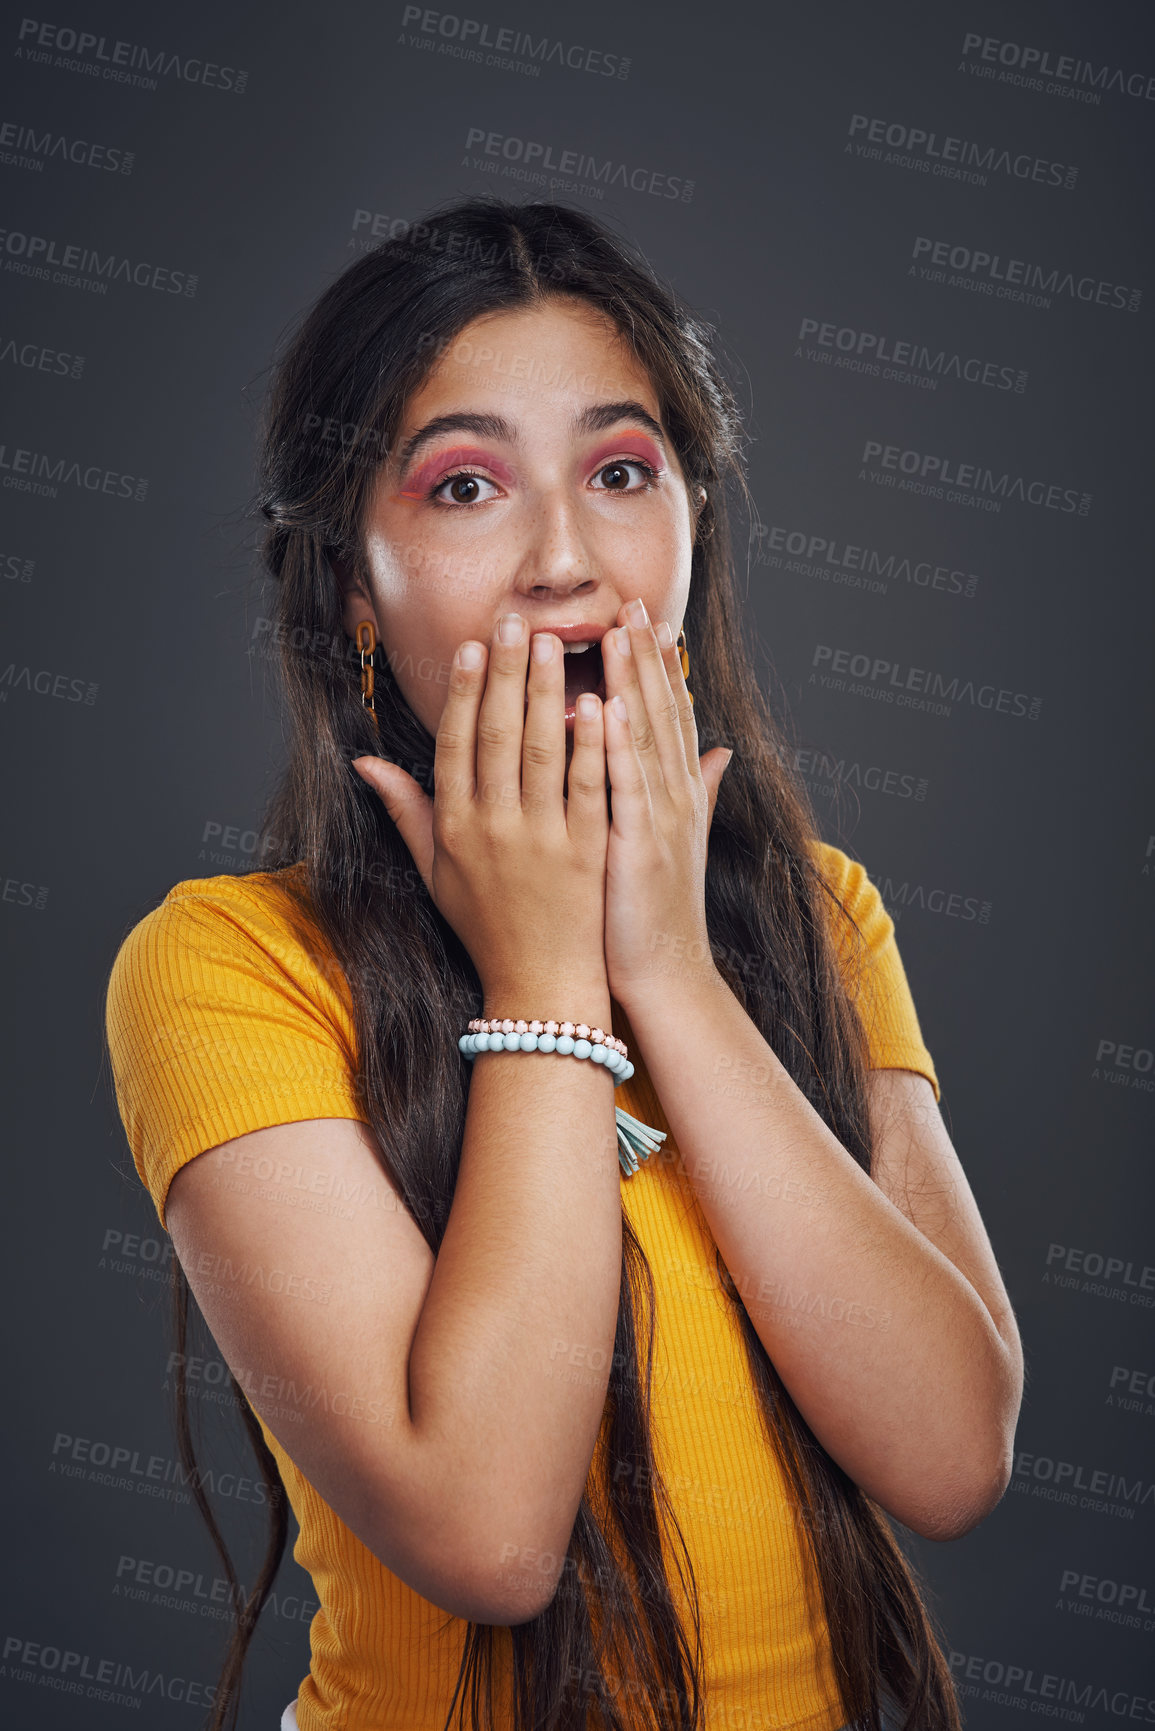 Buy stock photo Cropped portrait of an attractive teenage girl standing alone and looking surprised against a dark background in the studio